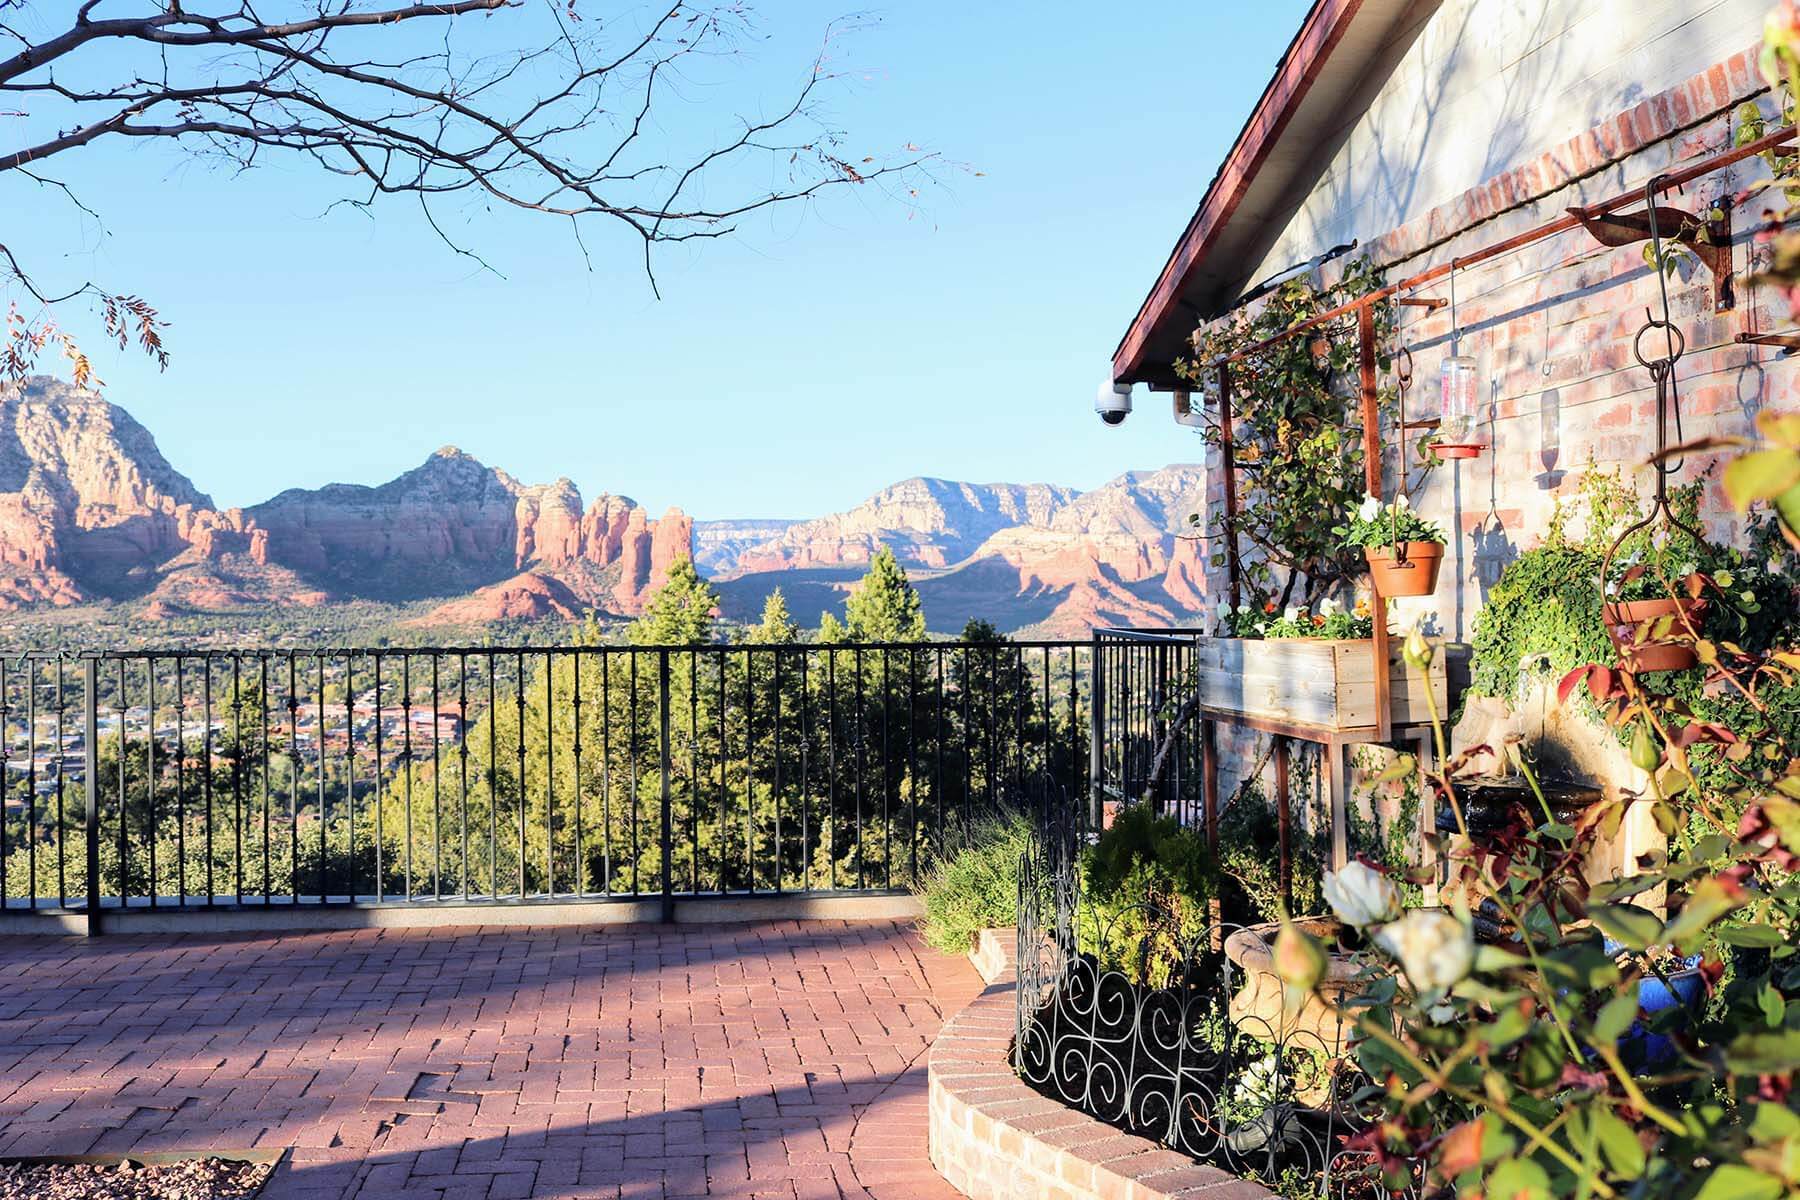 Hotels in Sedona, Arizona: the best places to relax in the Red Rocks